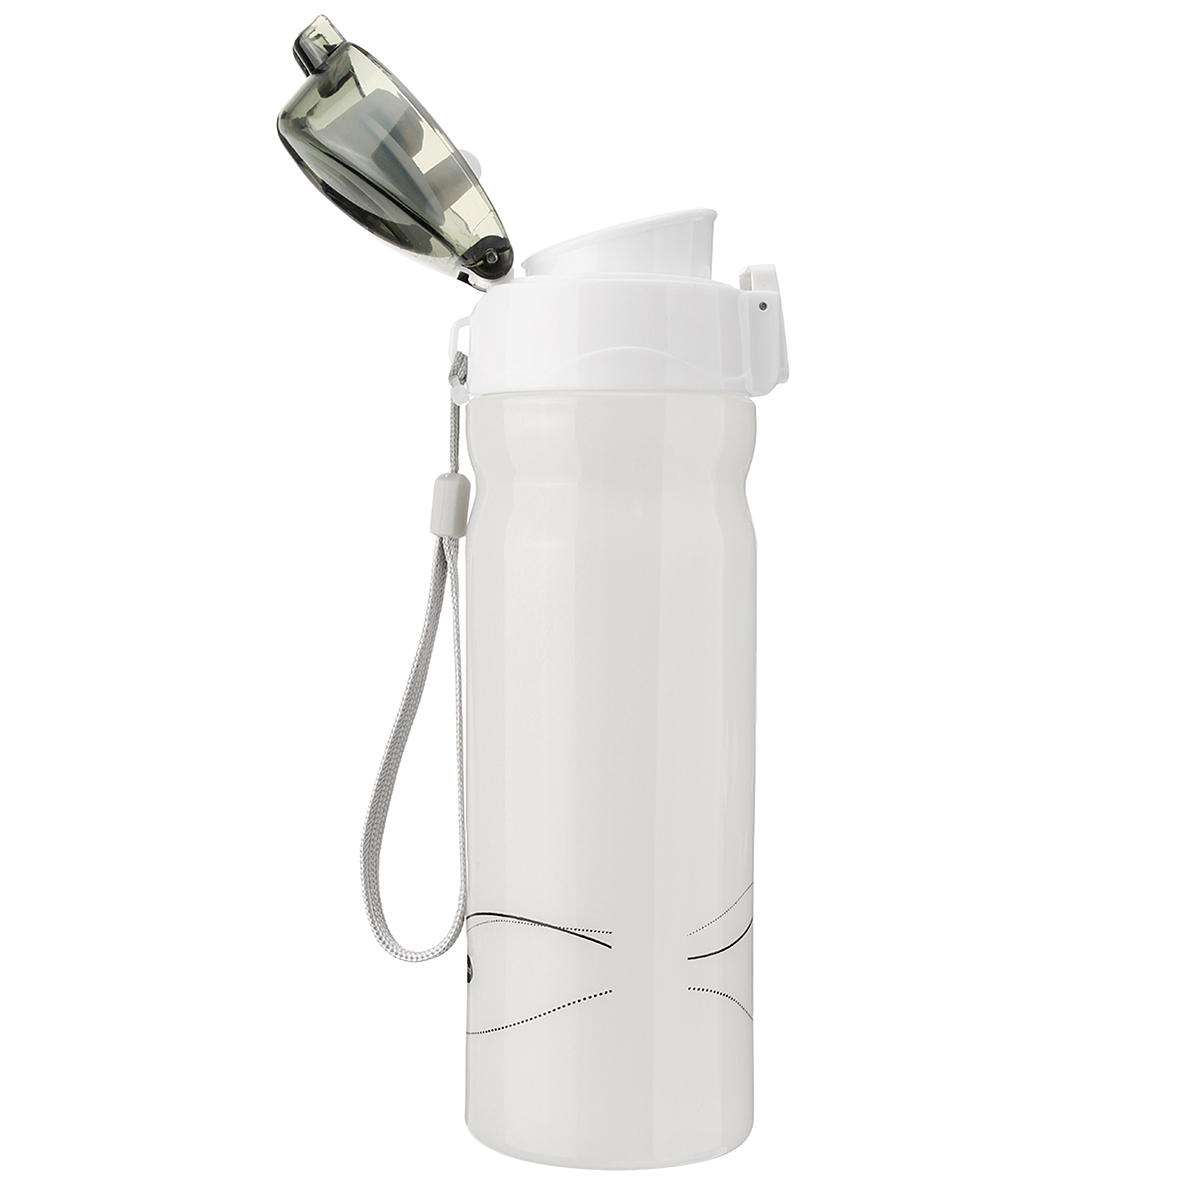 600ml20oz-High-quality-Food-Grade-Water-Bottle-for-long-hikes-trekking-hot-yoga-class-long-load-trip-1523049-4